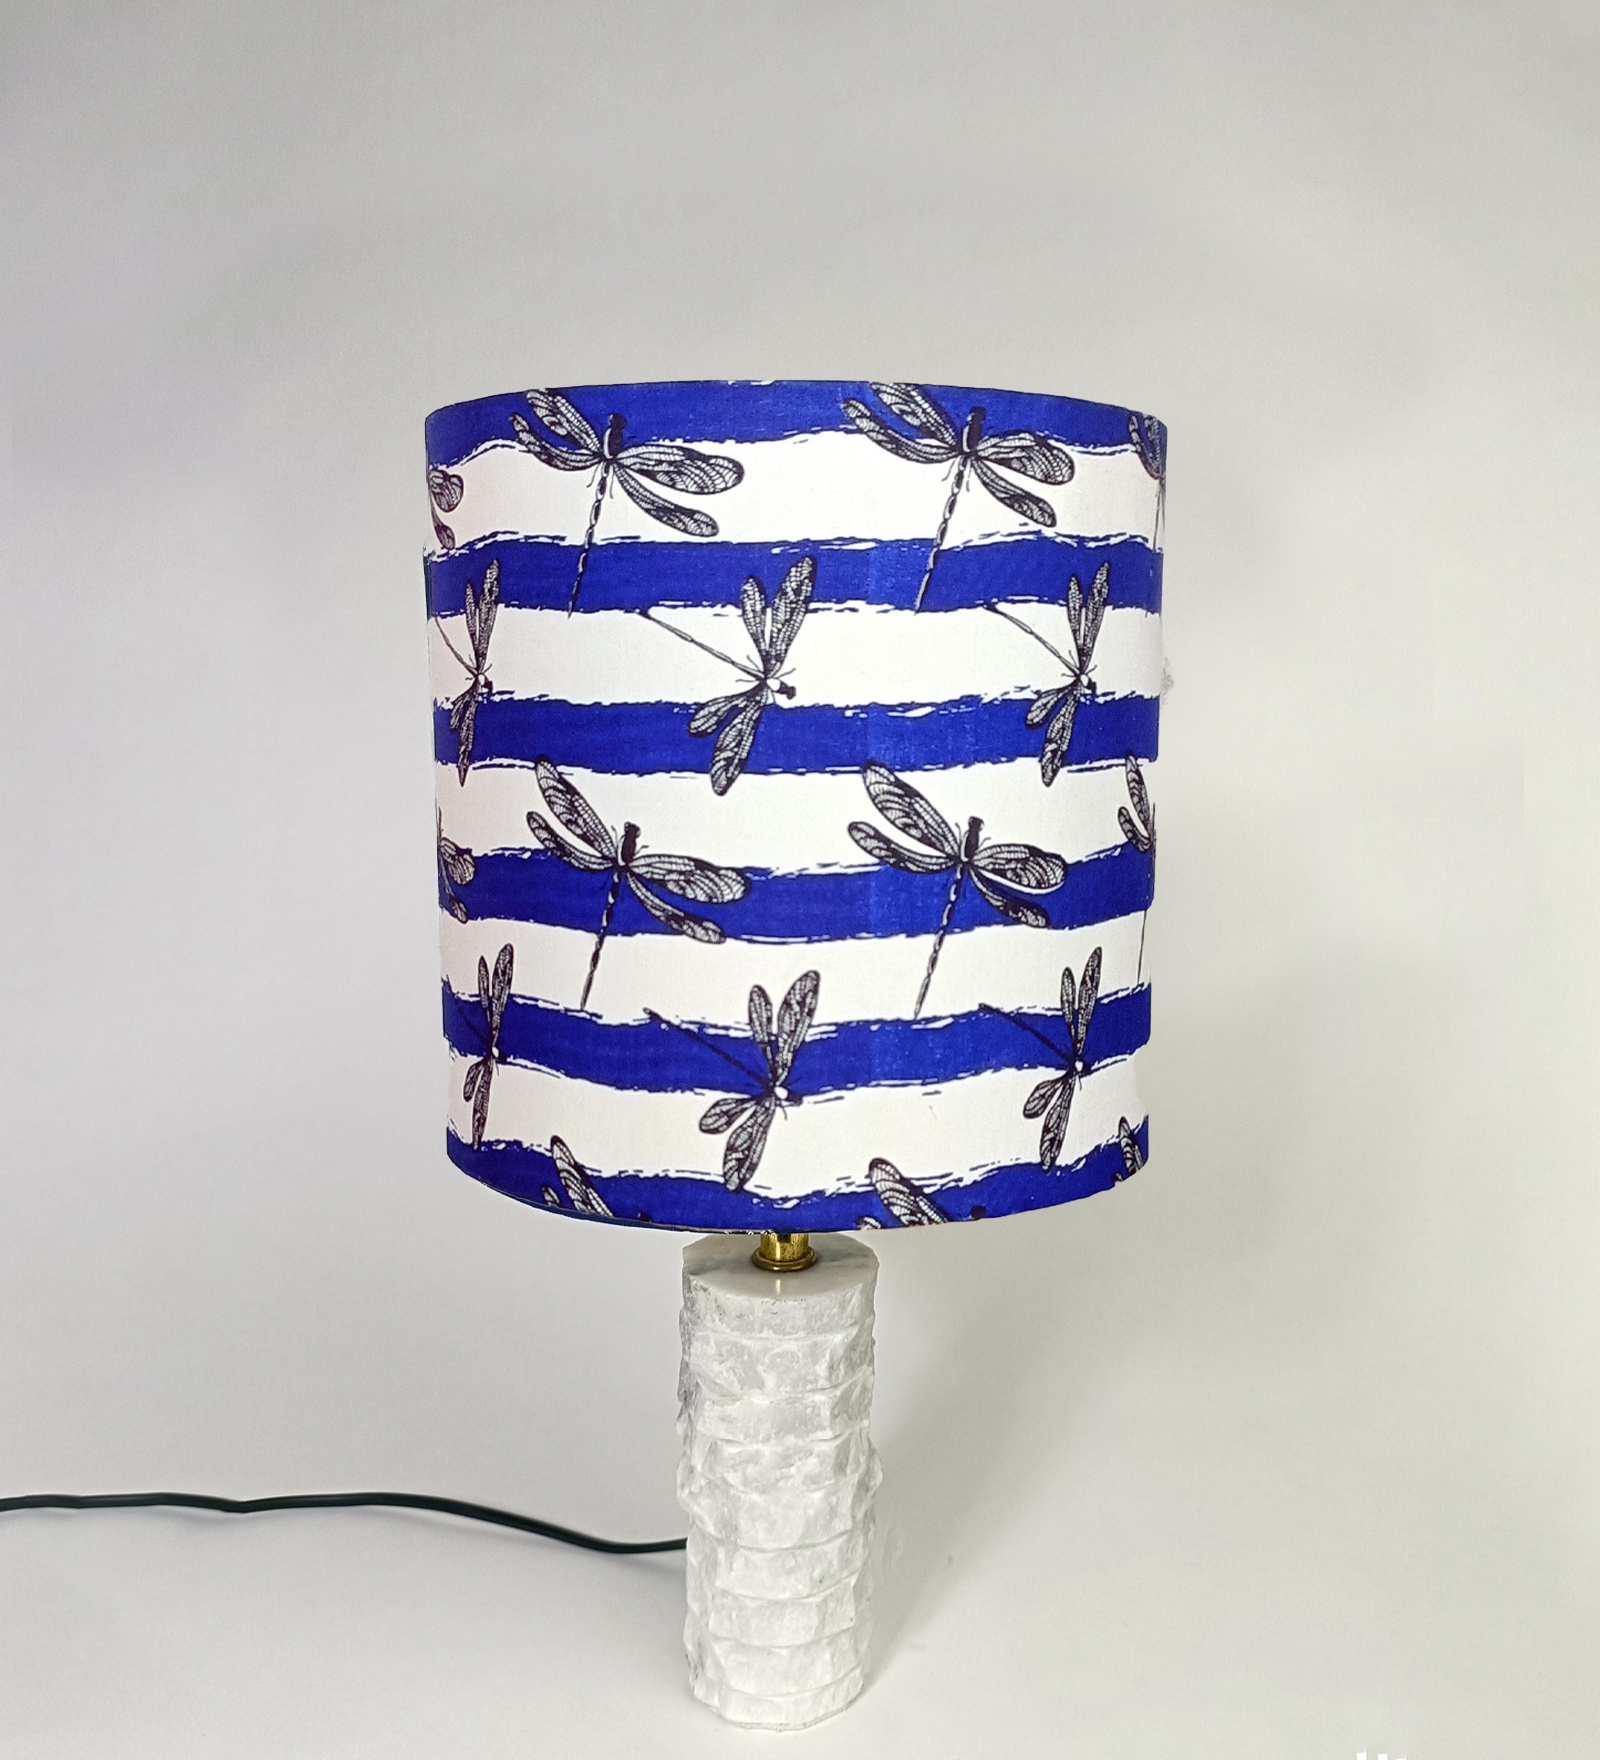 Heavenly Marble Table lamp